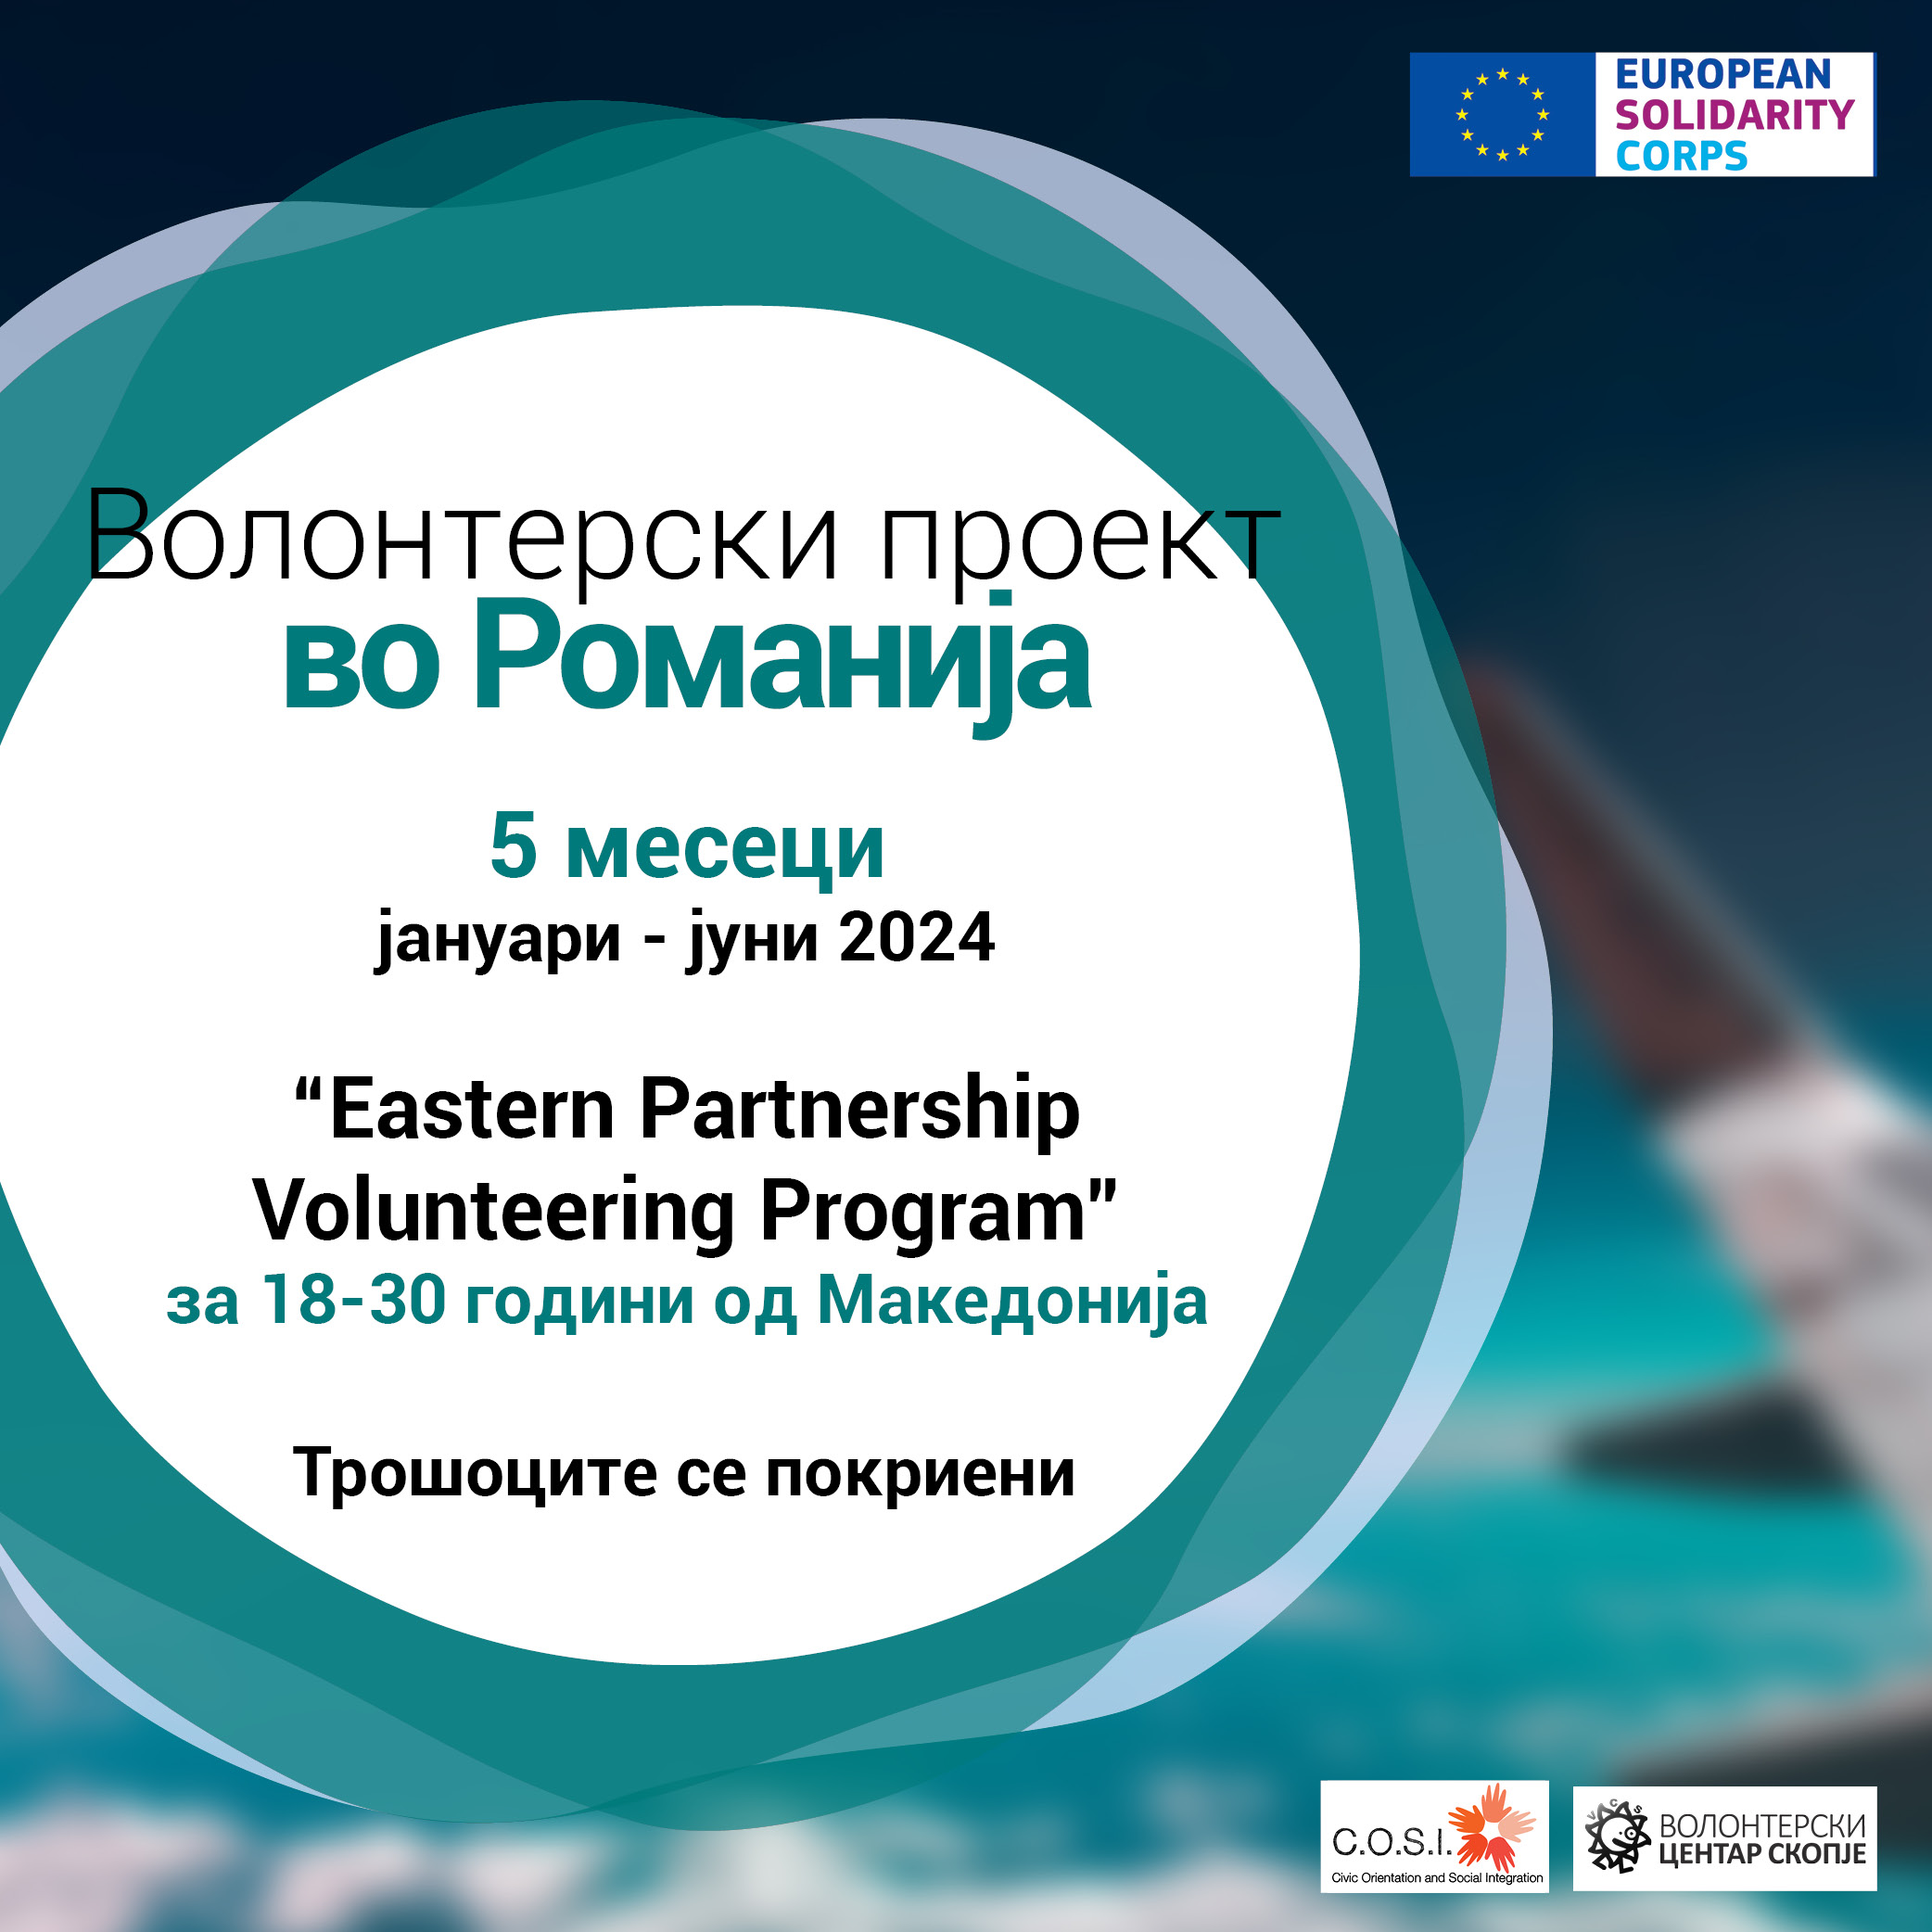 You are currently viewing Call for volunteers in Romania!